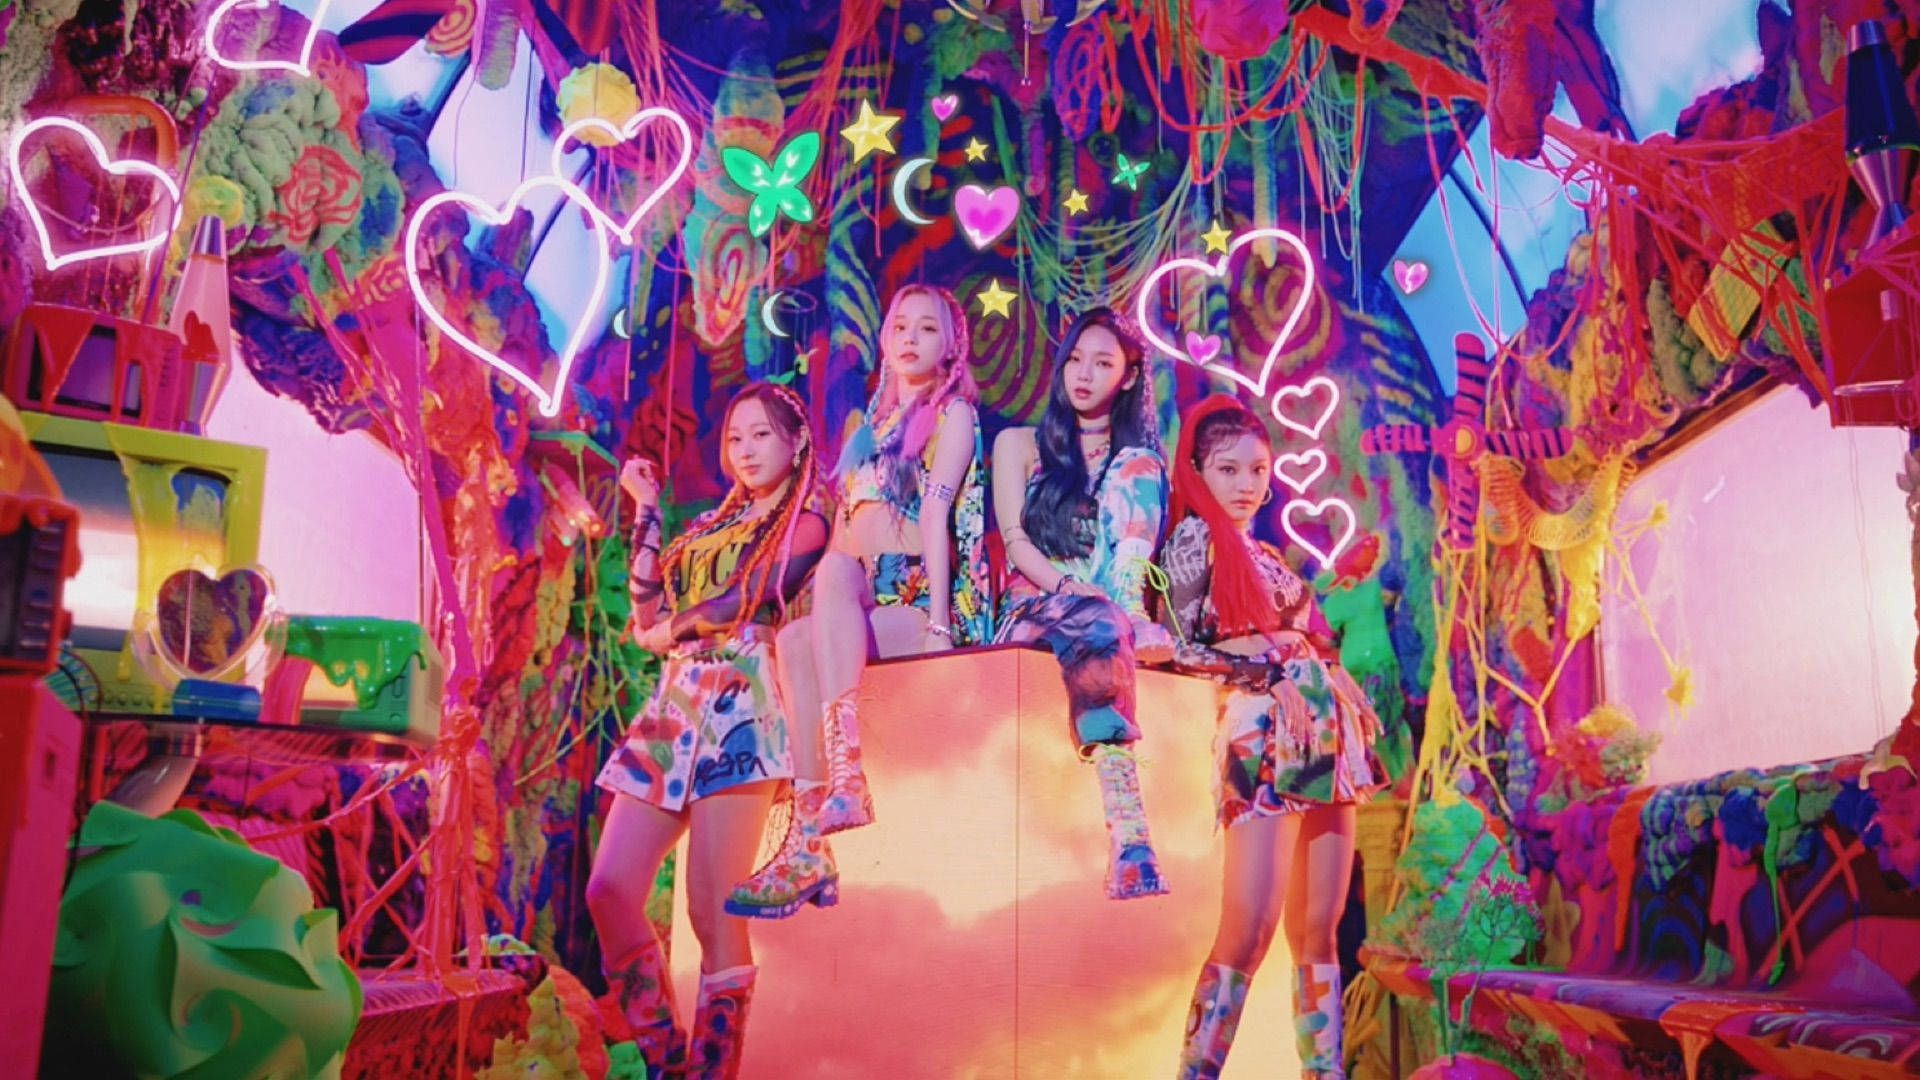 4 girls in a room with neon lights - Aespa